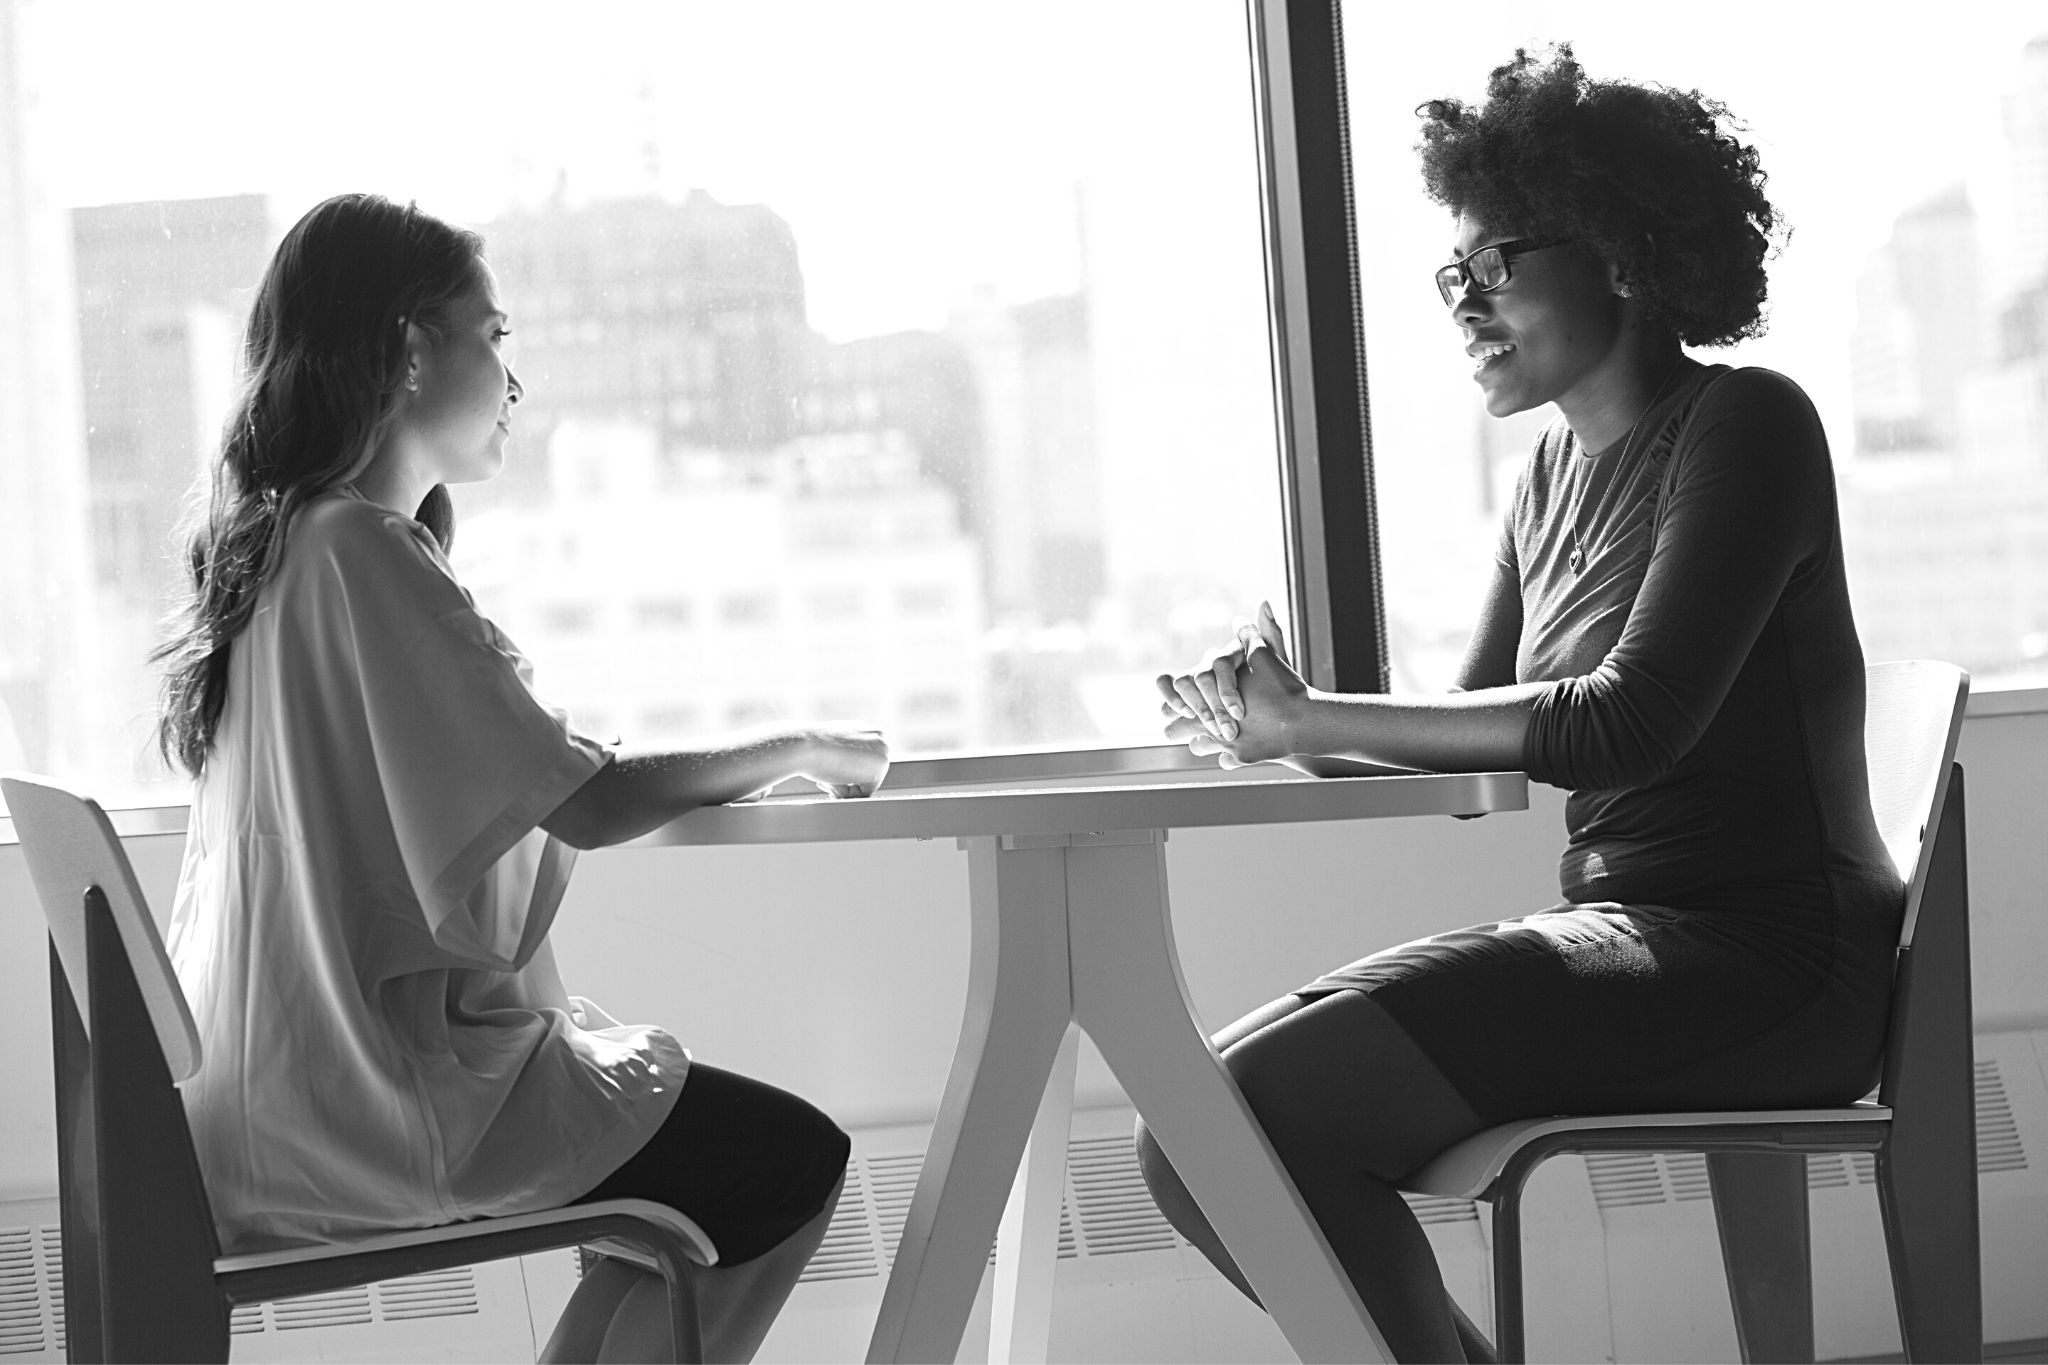 Two women in a business meeting